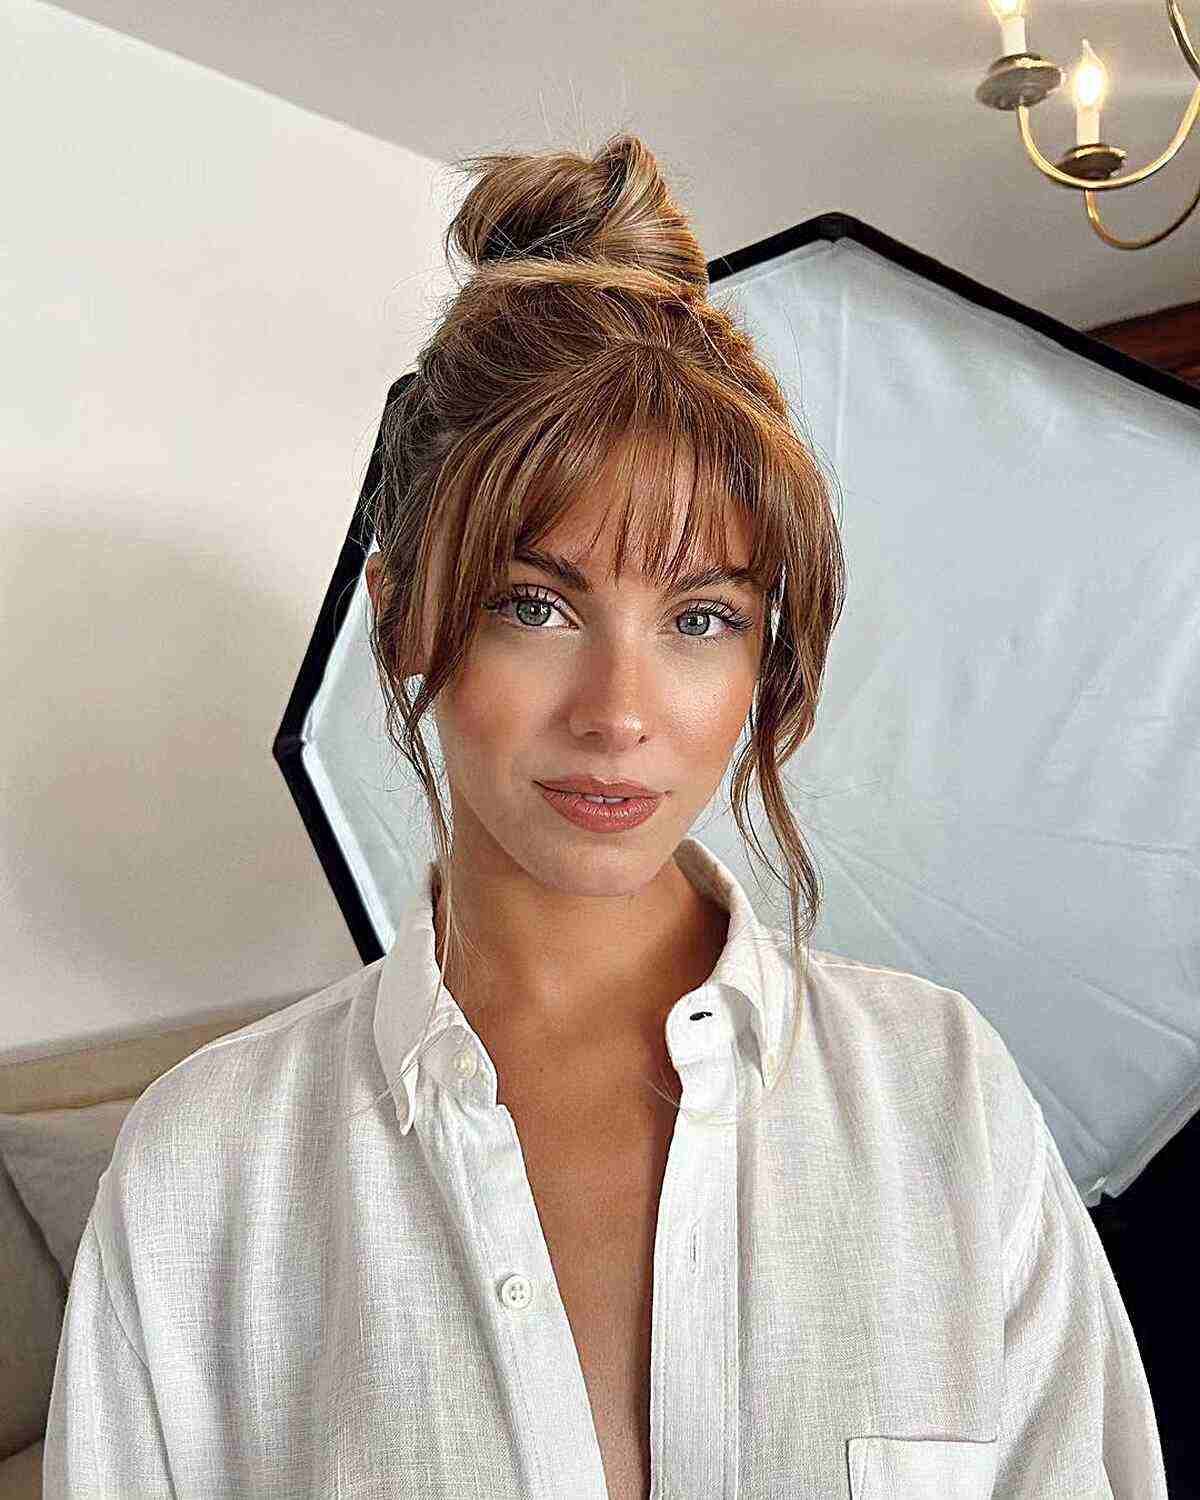 Top Knot Loose Updo with Face-Framing Bangs